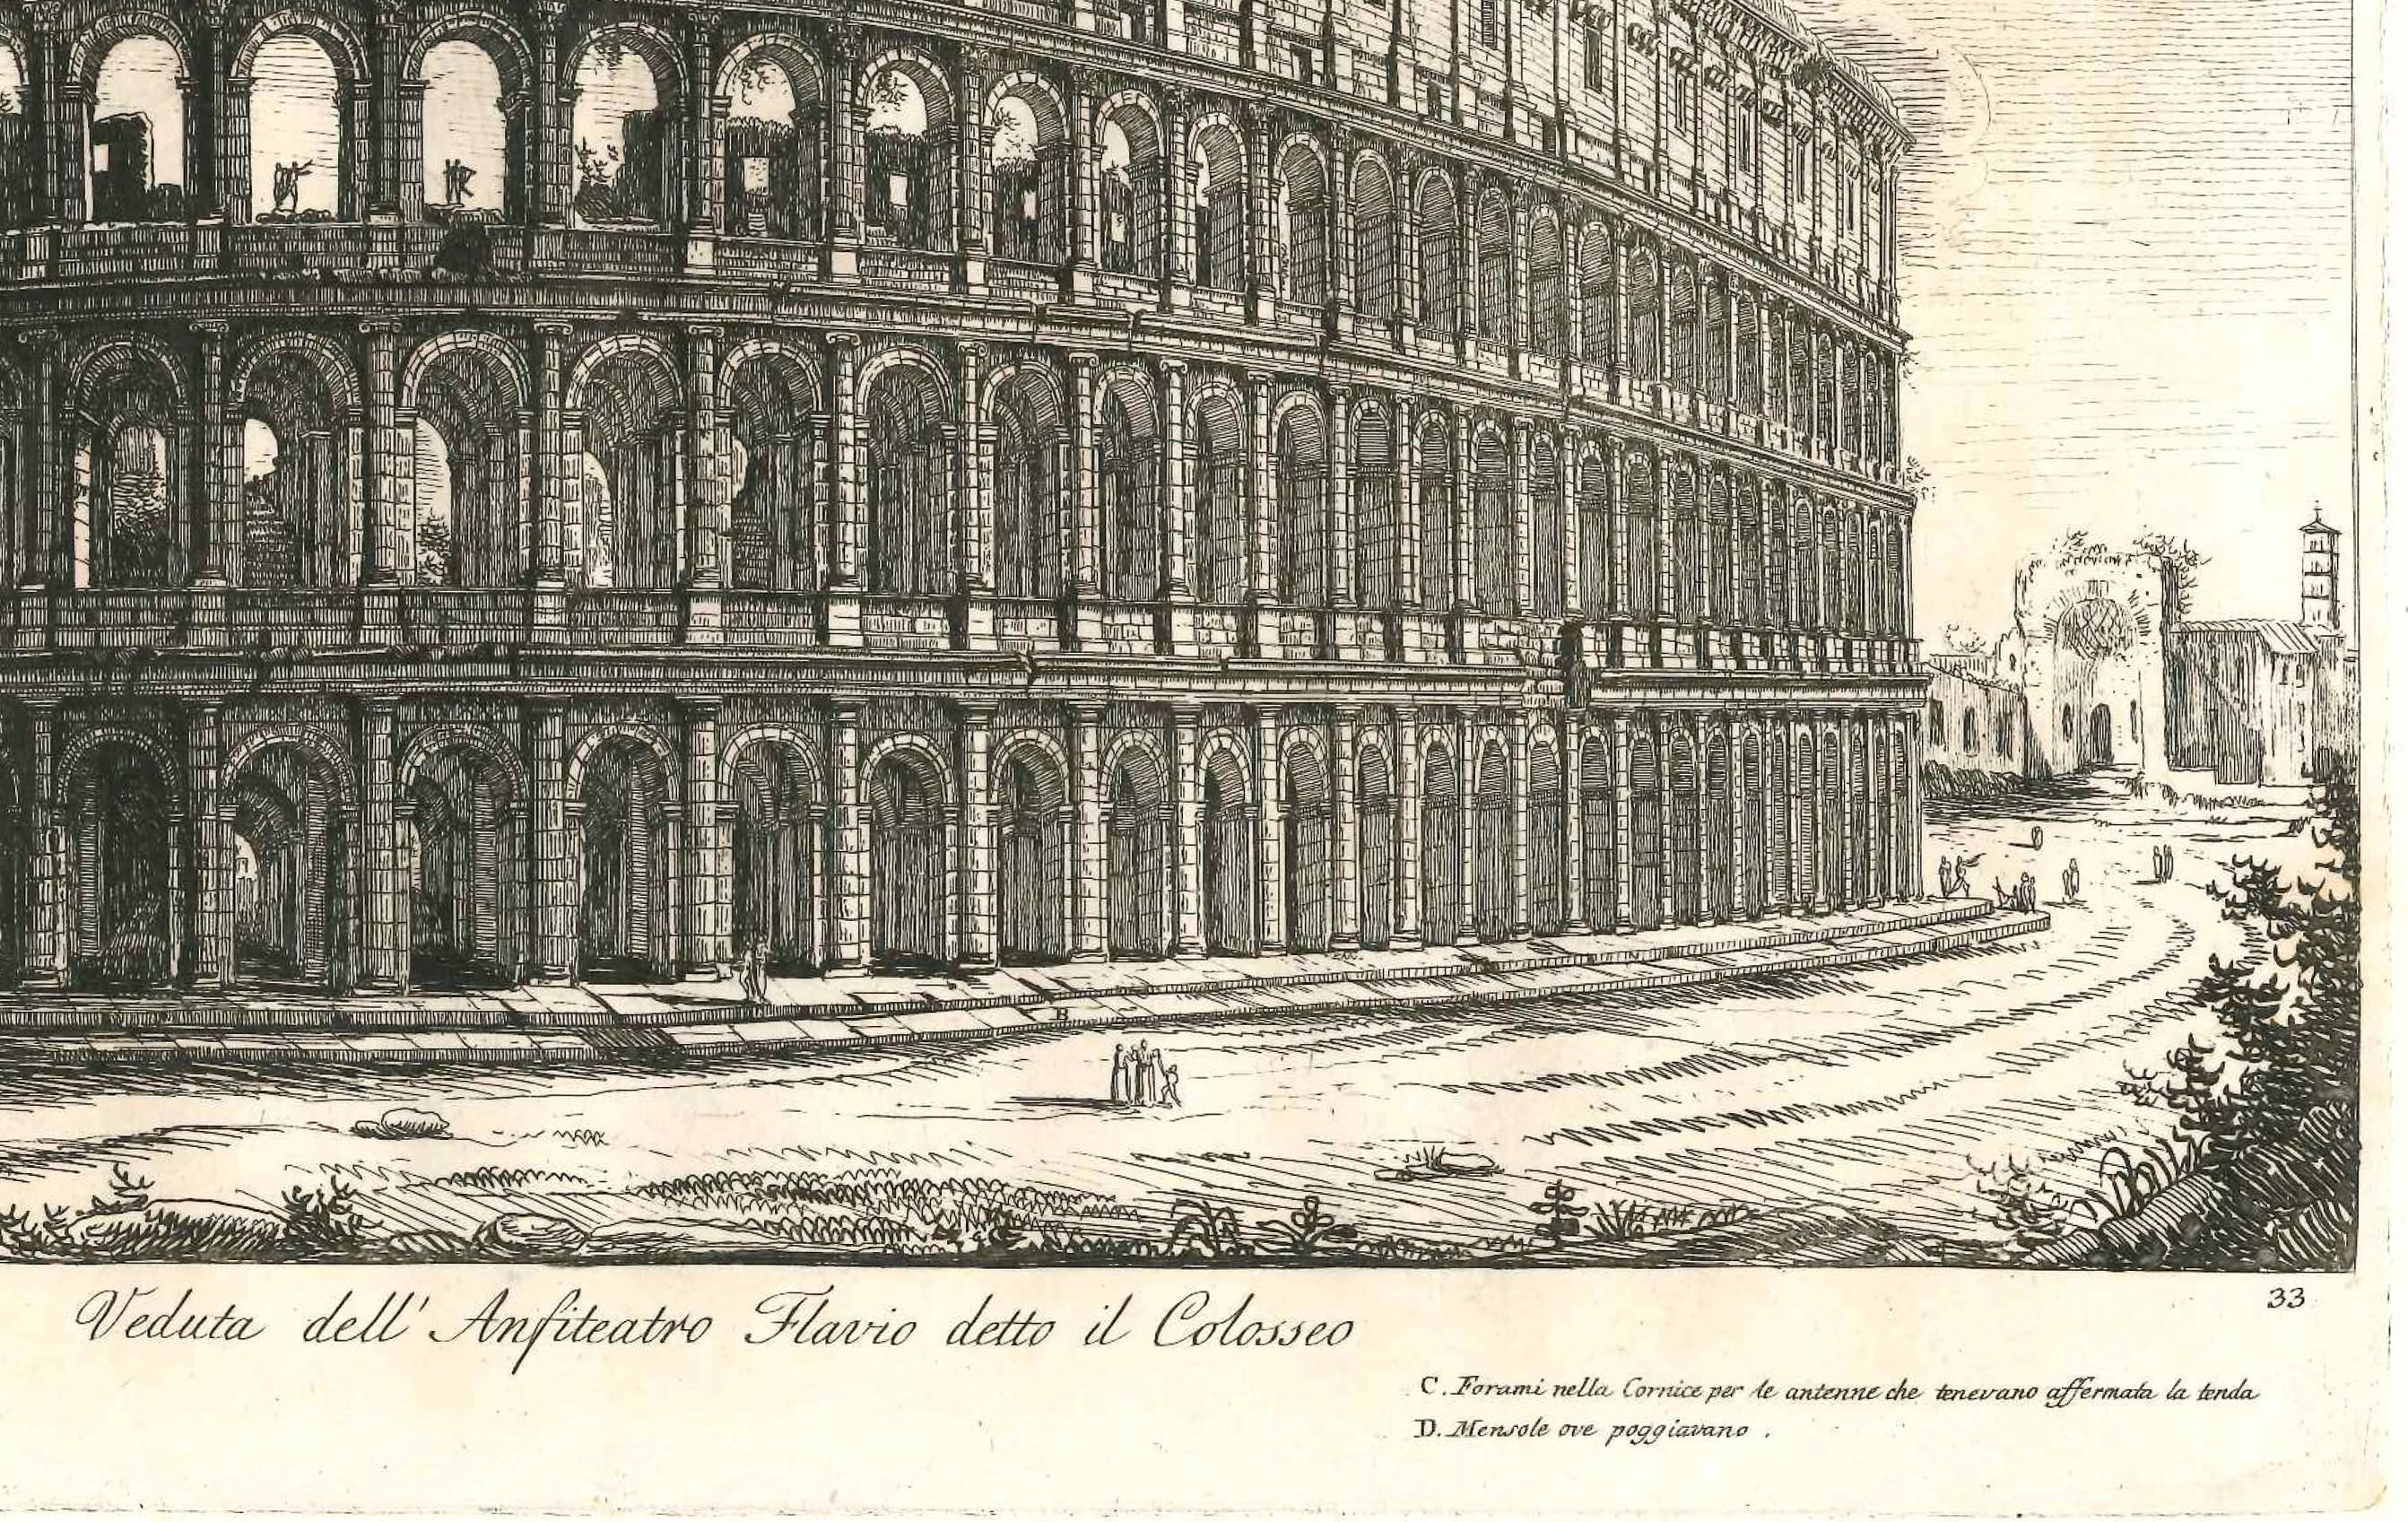 Luigi Rossini Like his predecessor Giovanni Battista Piranesi, Rossini focused on extant antique Roman architecture and excavations in Rome and its environs, and rendered in exquisite detail classical architecture of Rome and its surrounding